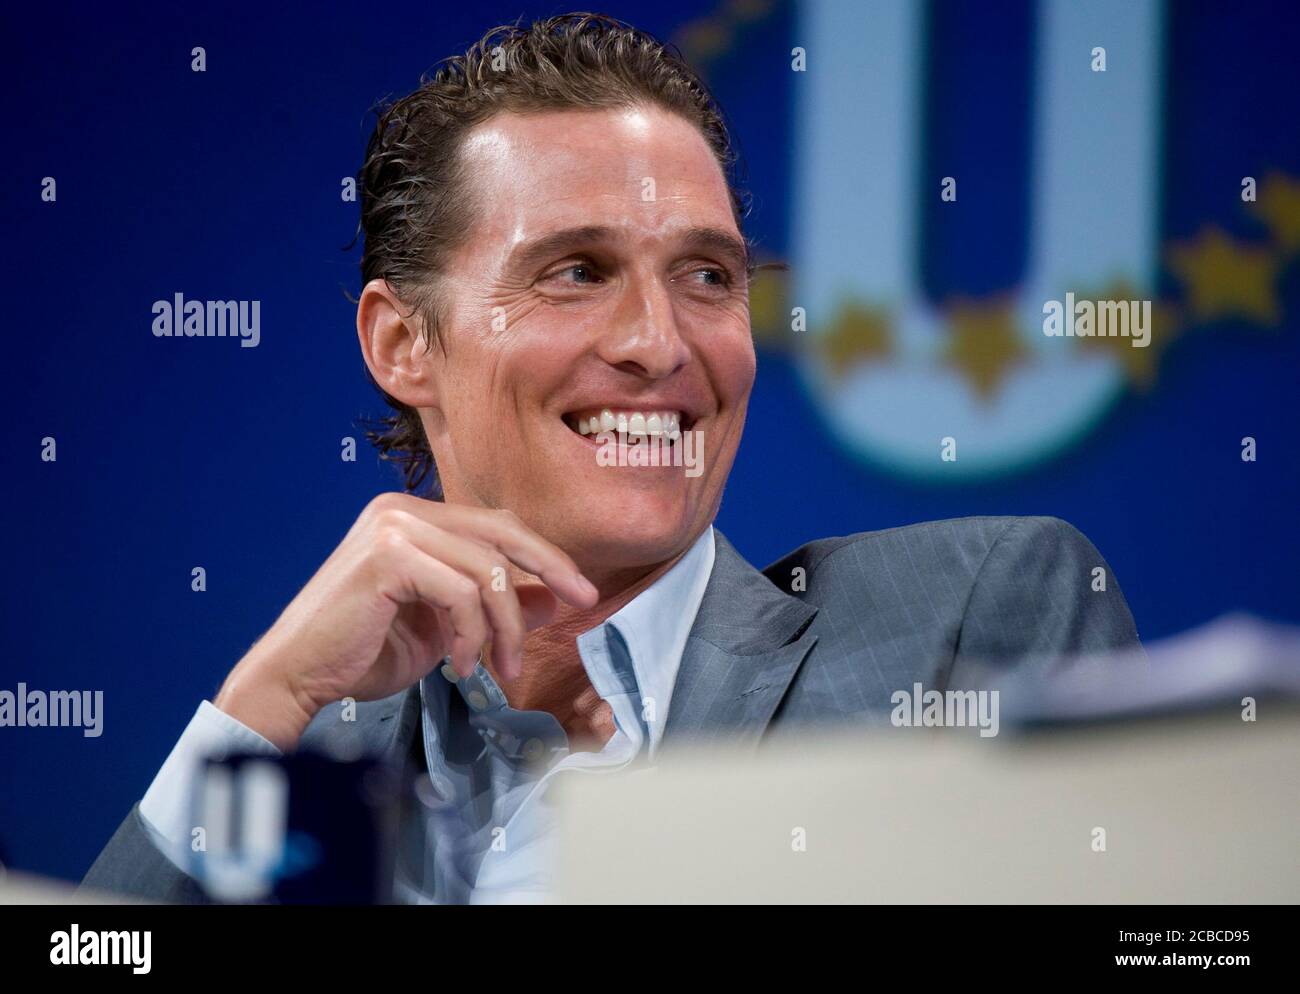 Austin, Texas USA, February 14, 2009: Actor Matthew McConaughey listens during a seminar at the second-annual Clinton Global Initiative University, a conference bringing together more than 1,000 students to take action on global challenges such as poverty, hunger, energy, climate change and global health. ©Bob Daemmrich Stock Photo